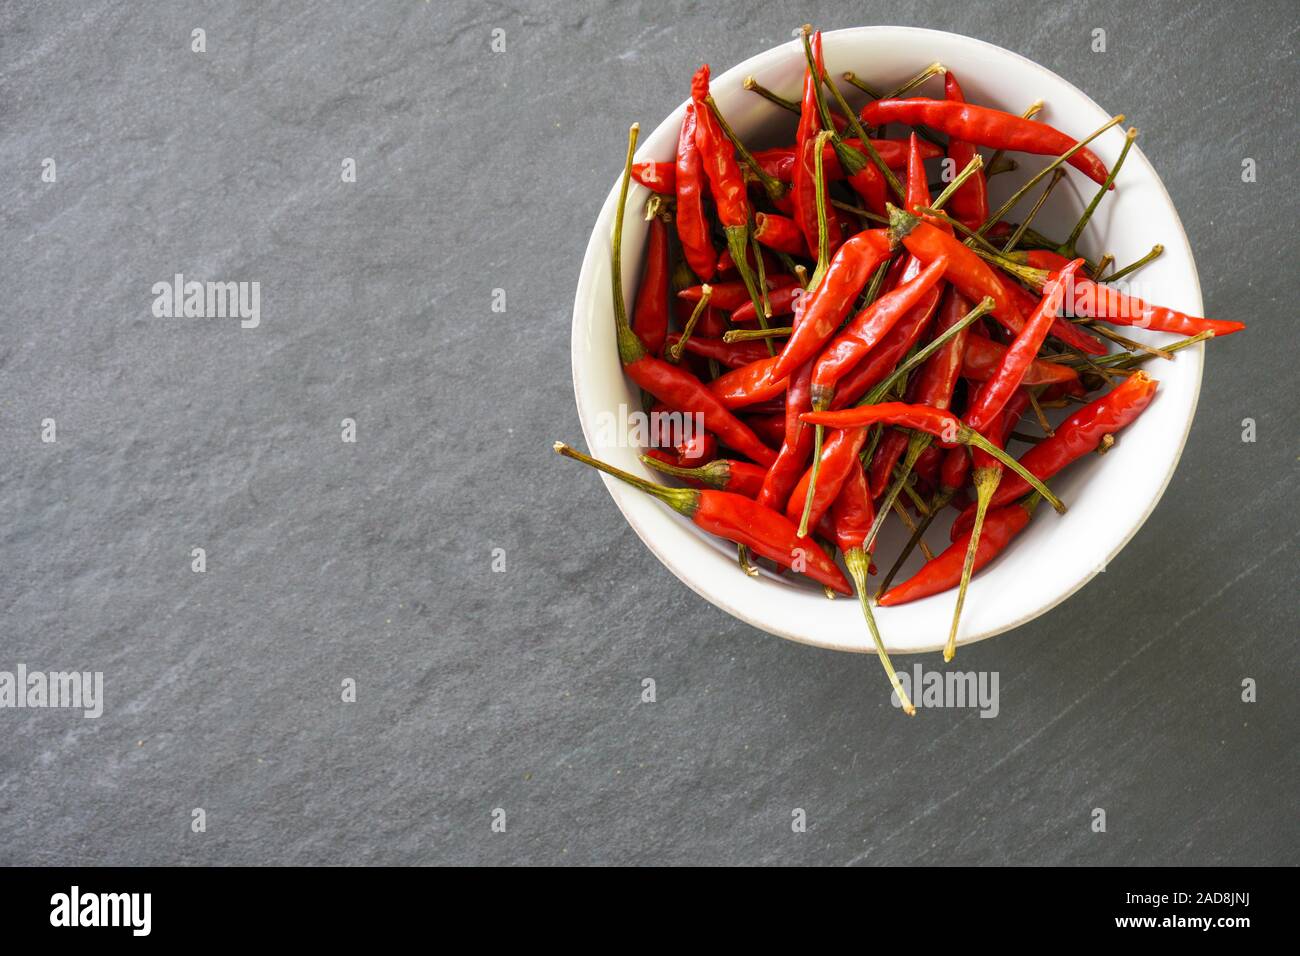 A white bowl full of bright red Thai chiles with green stems resting on a gray slate background with copy space; food and cooking Stock Photo